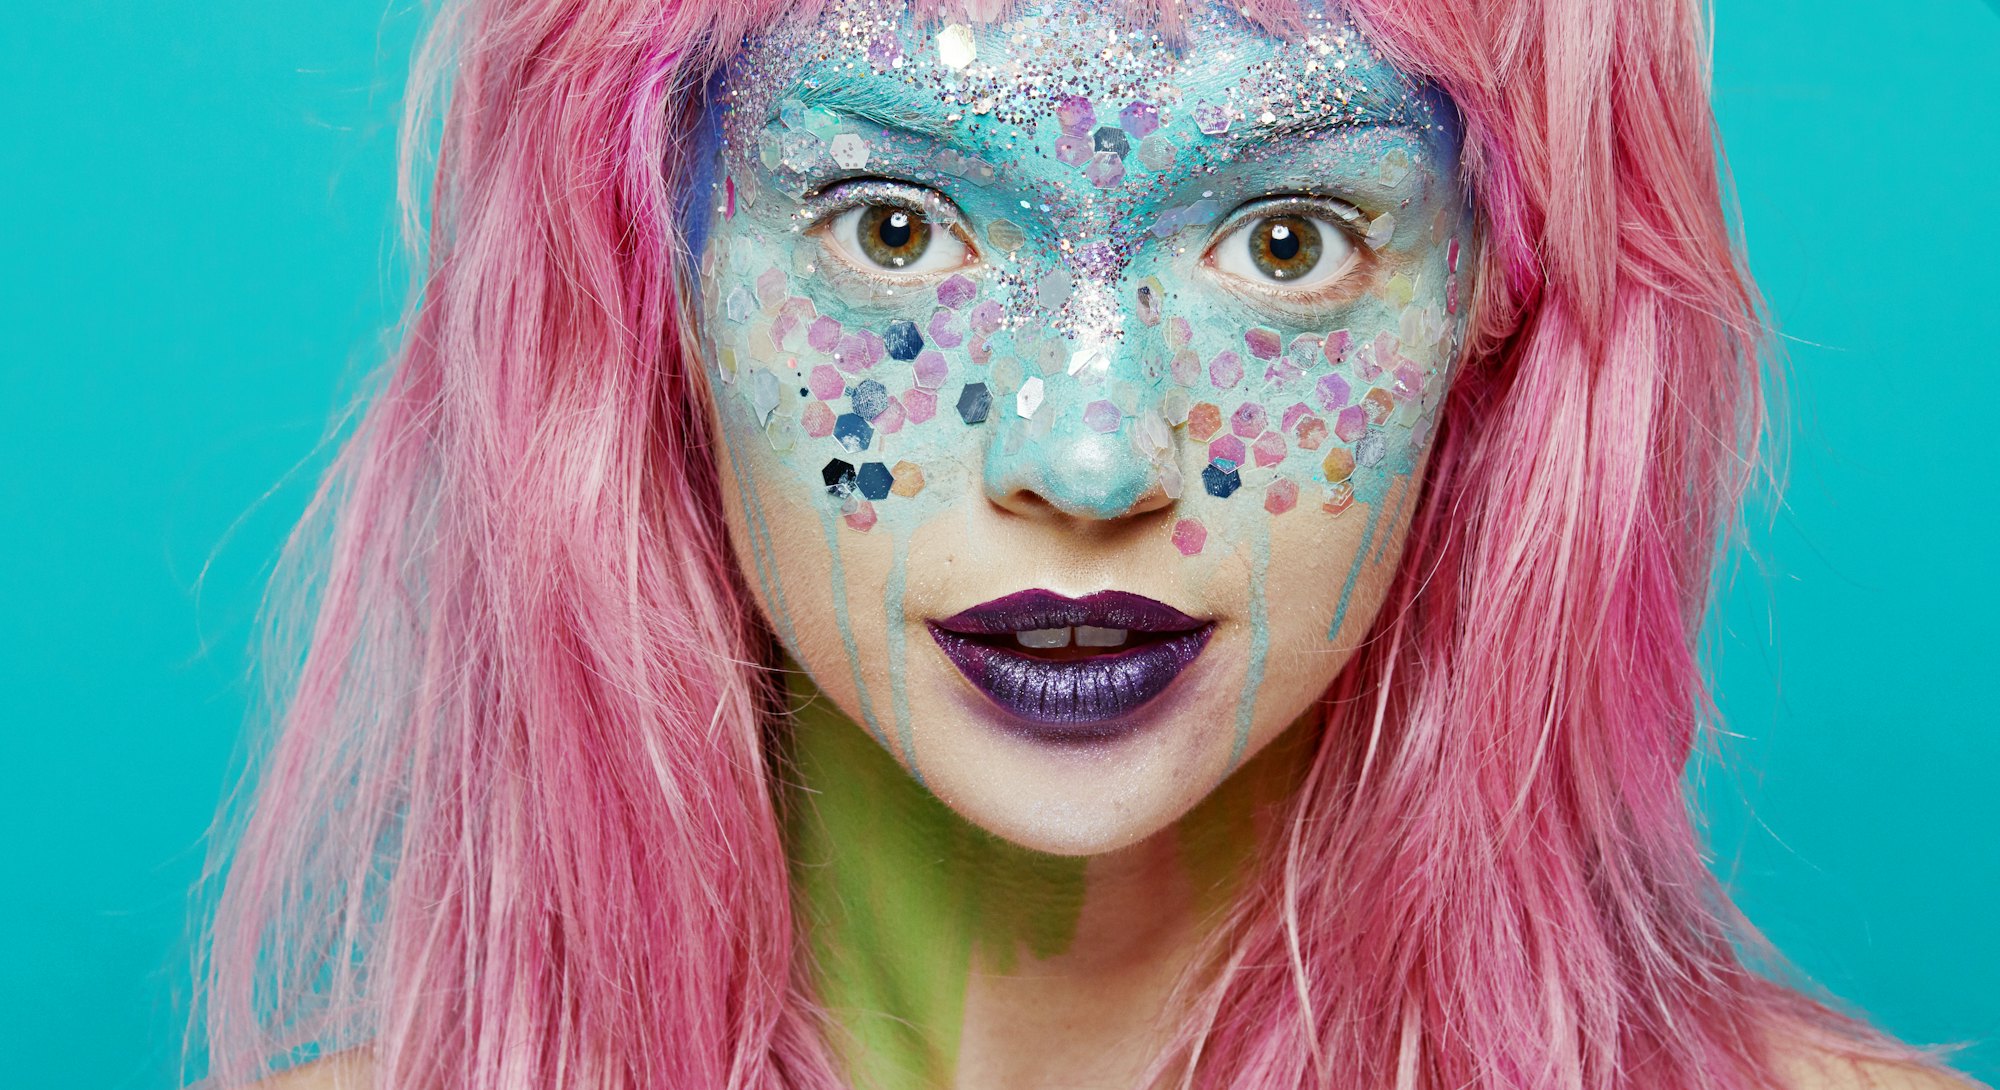 3 Mermaid Makeup Tutorials For Halloween That Are Way Easier Than They Look